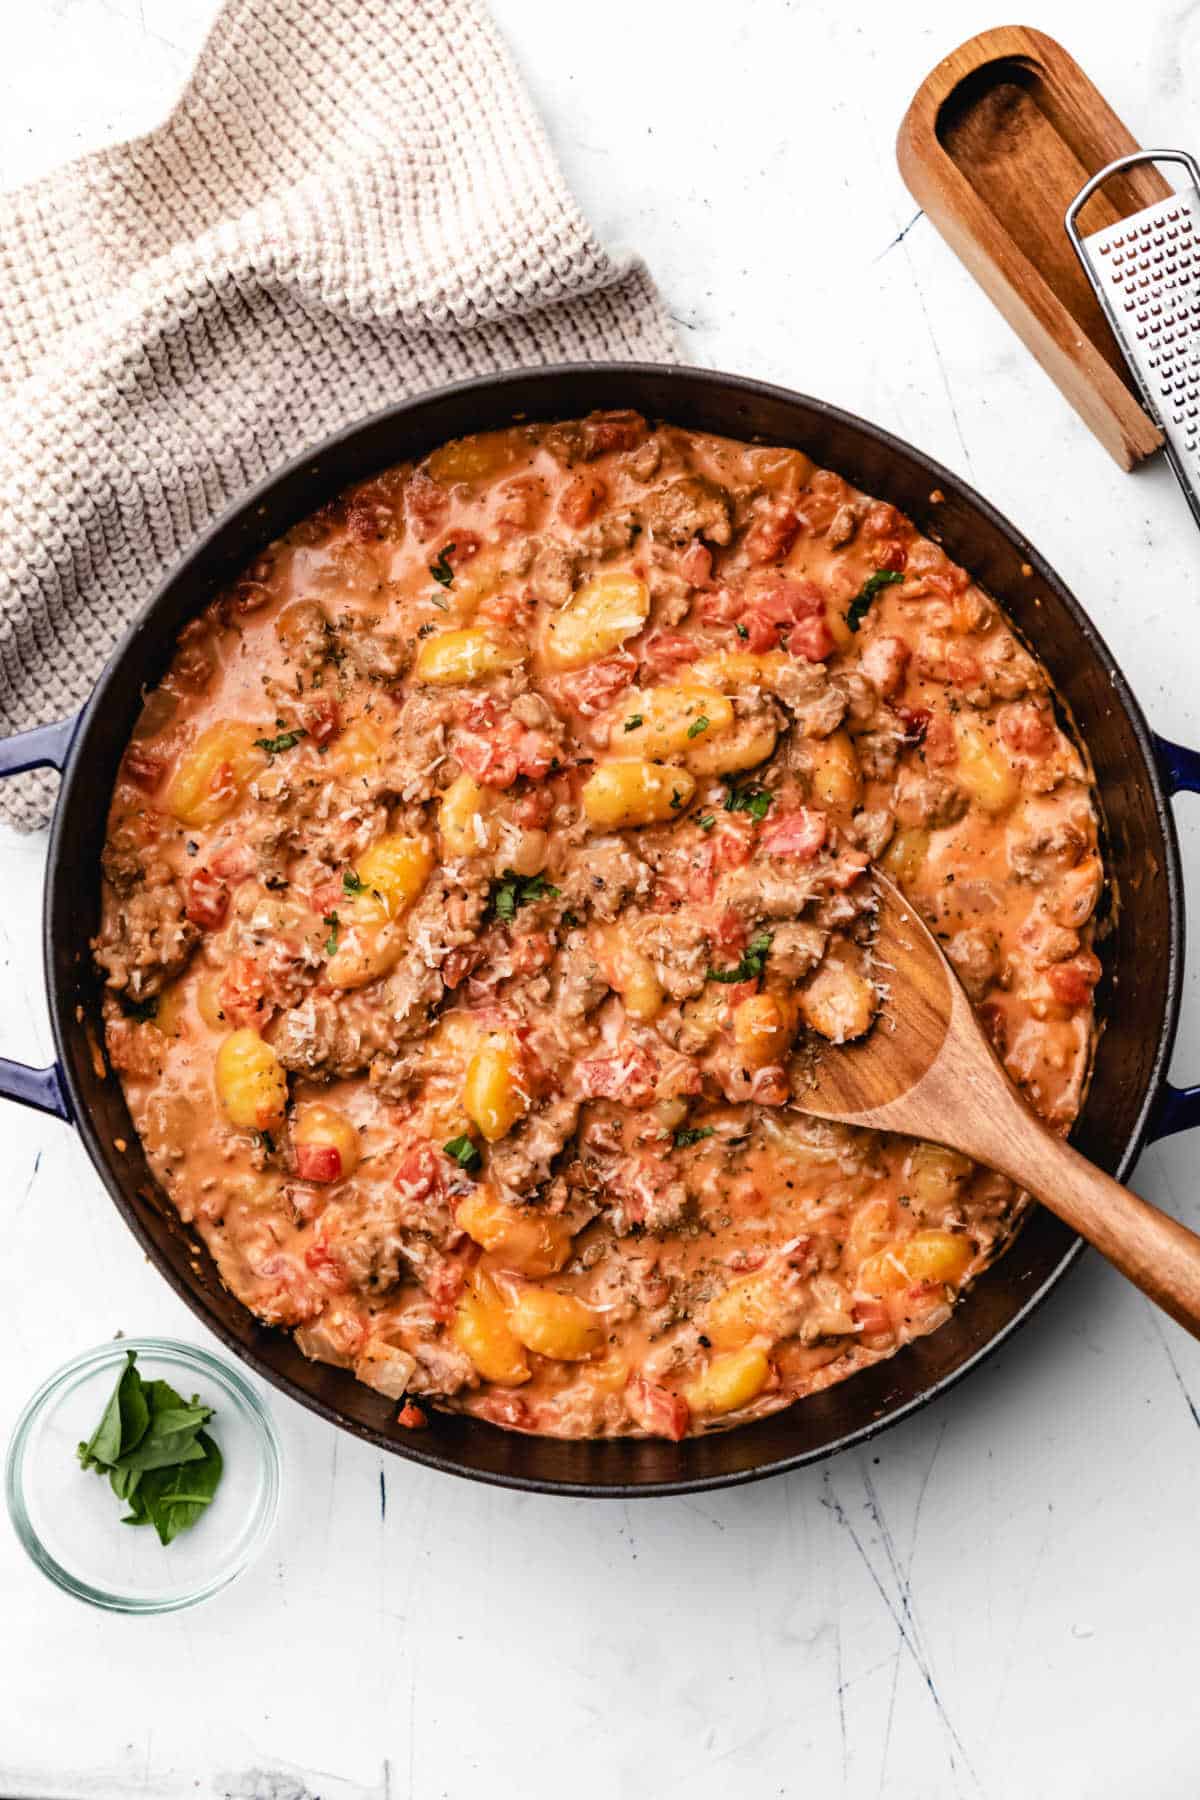 A skillet full of ground sausage and tomato stew with a wooden spoon.